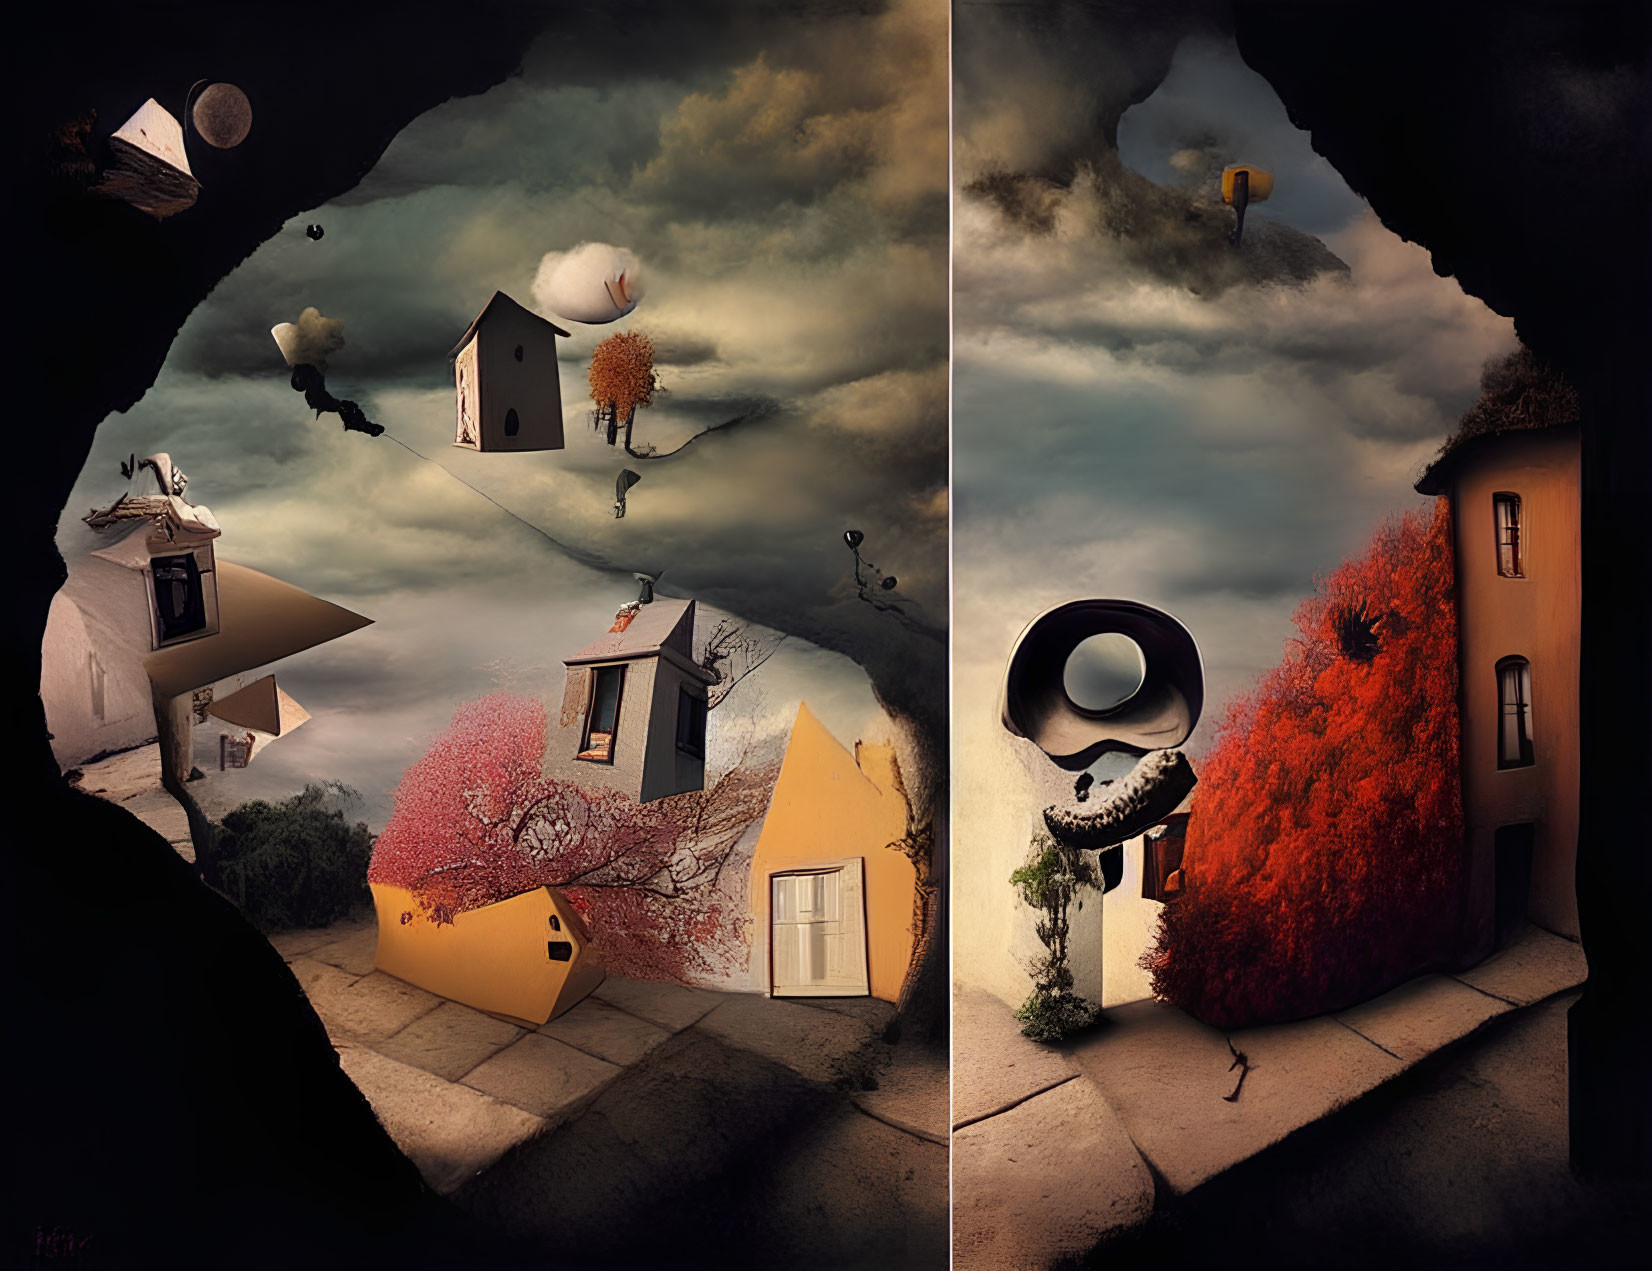 Surreal Artwork: Floating Houses, Trees, Whimsical Elements on Cloudy Autumn Landscape